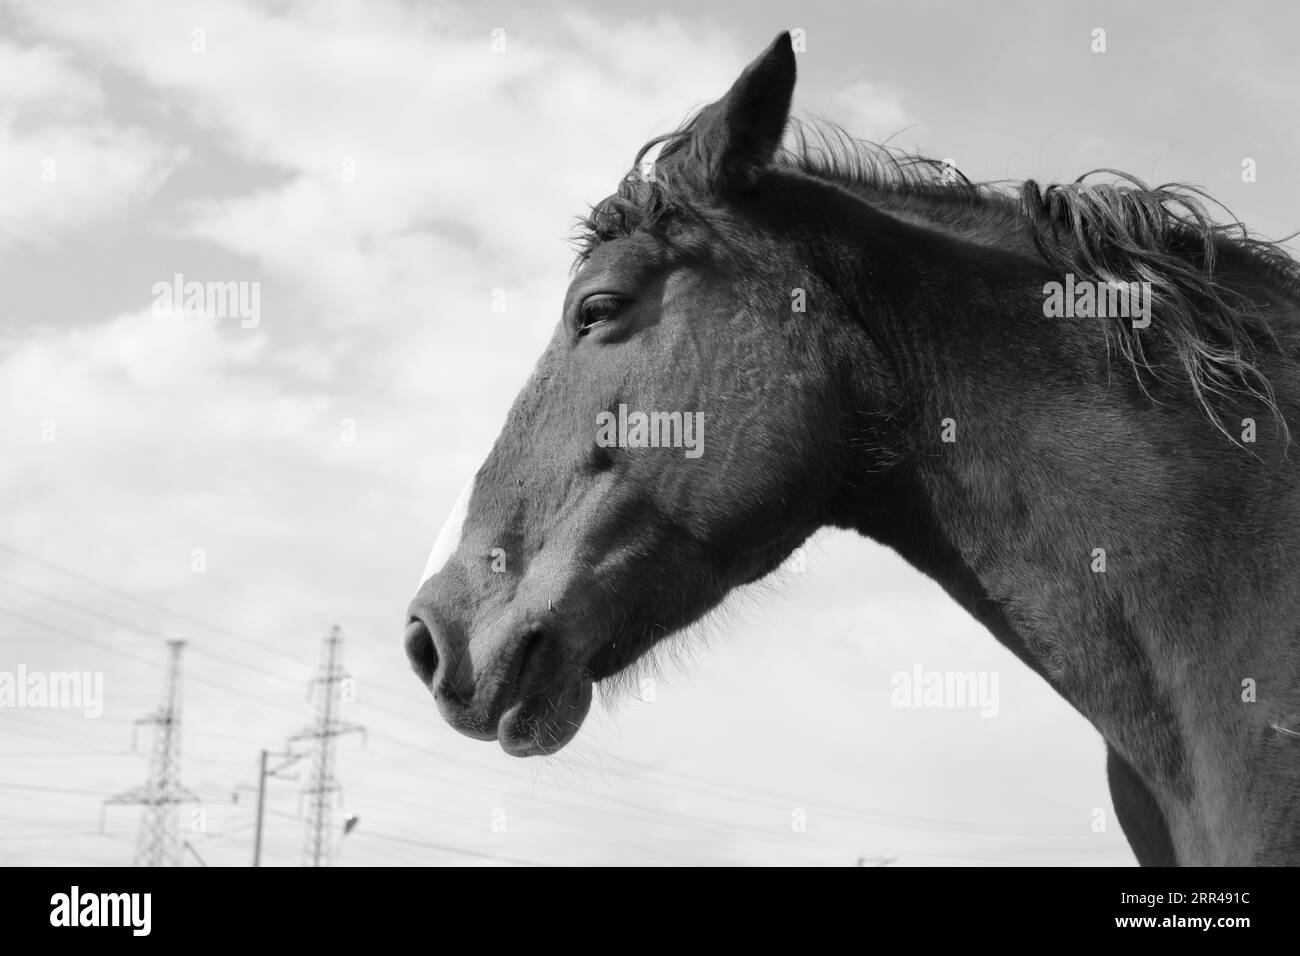 This pictures was taken in one of the most beatiful animal cores in Yerevan. There is a prettyest and cutest horses you've ever seen. Stock Photo